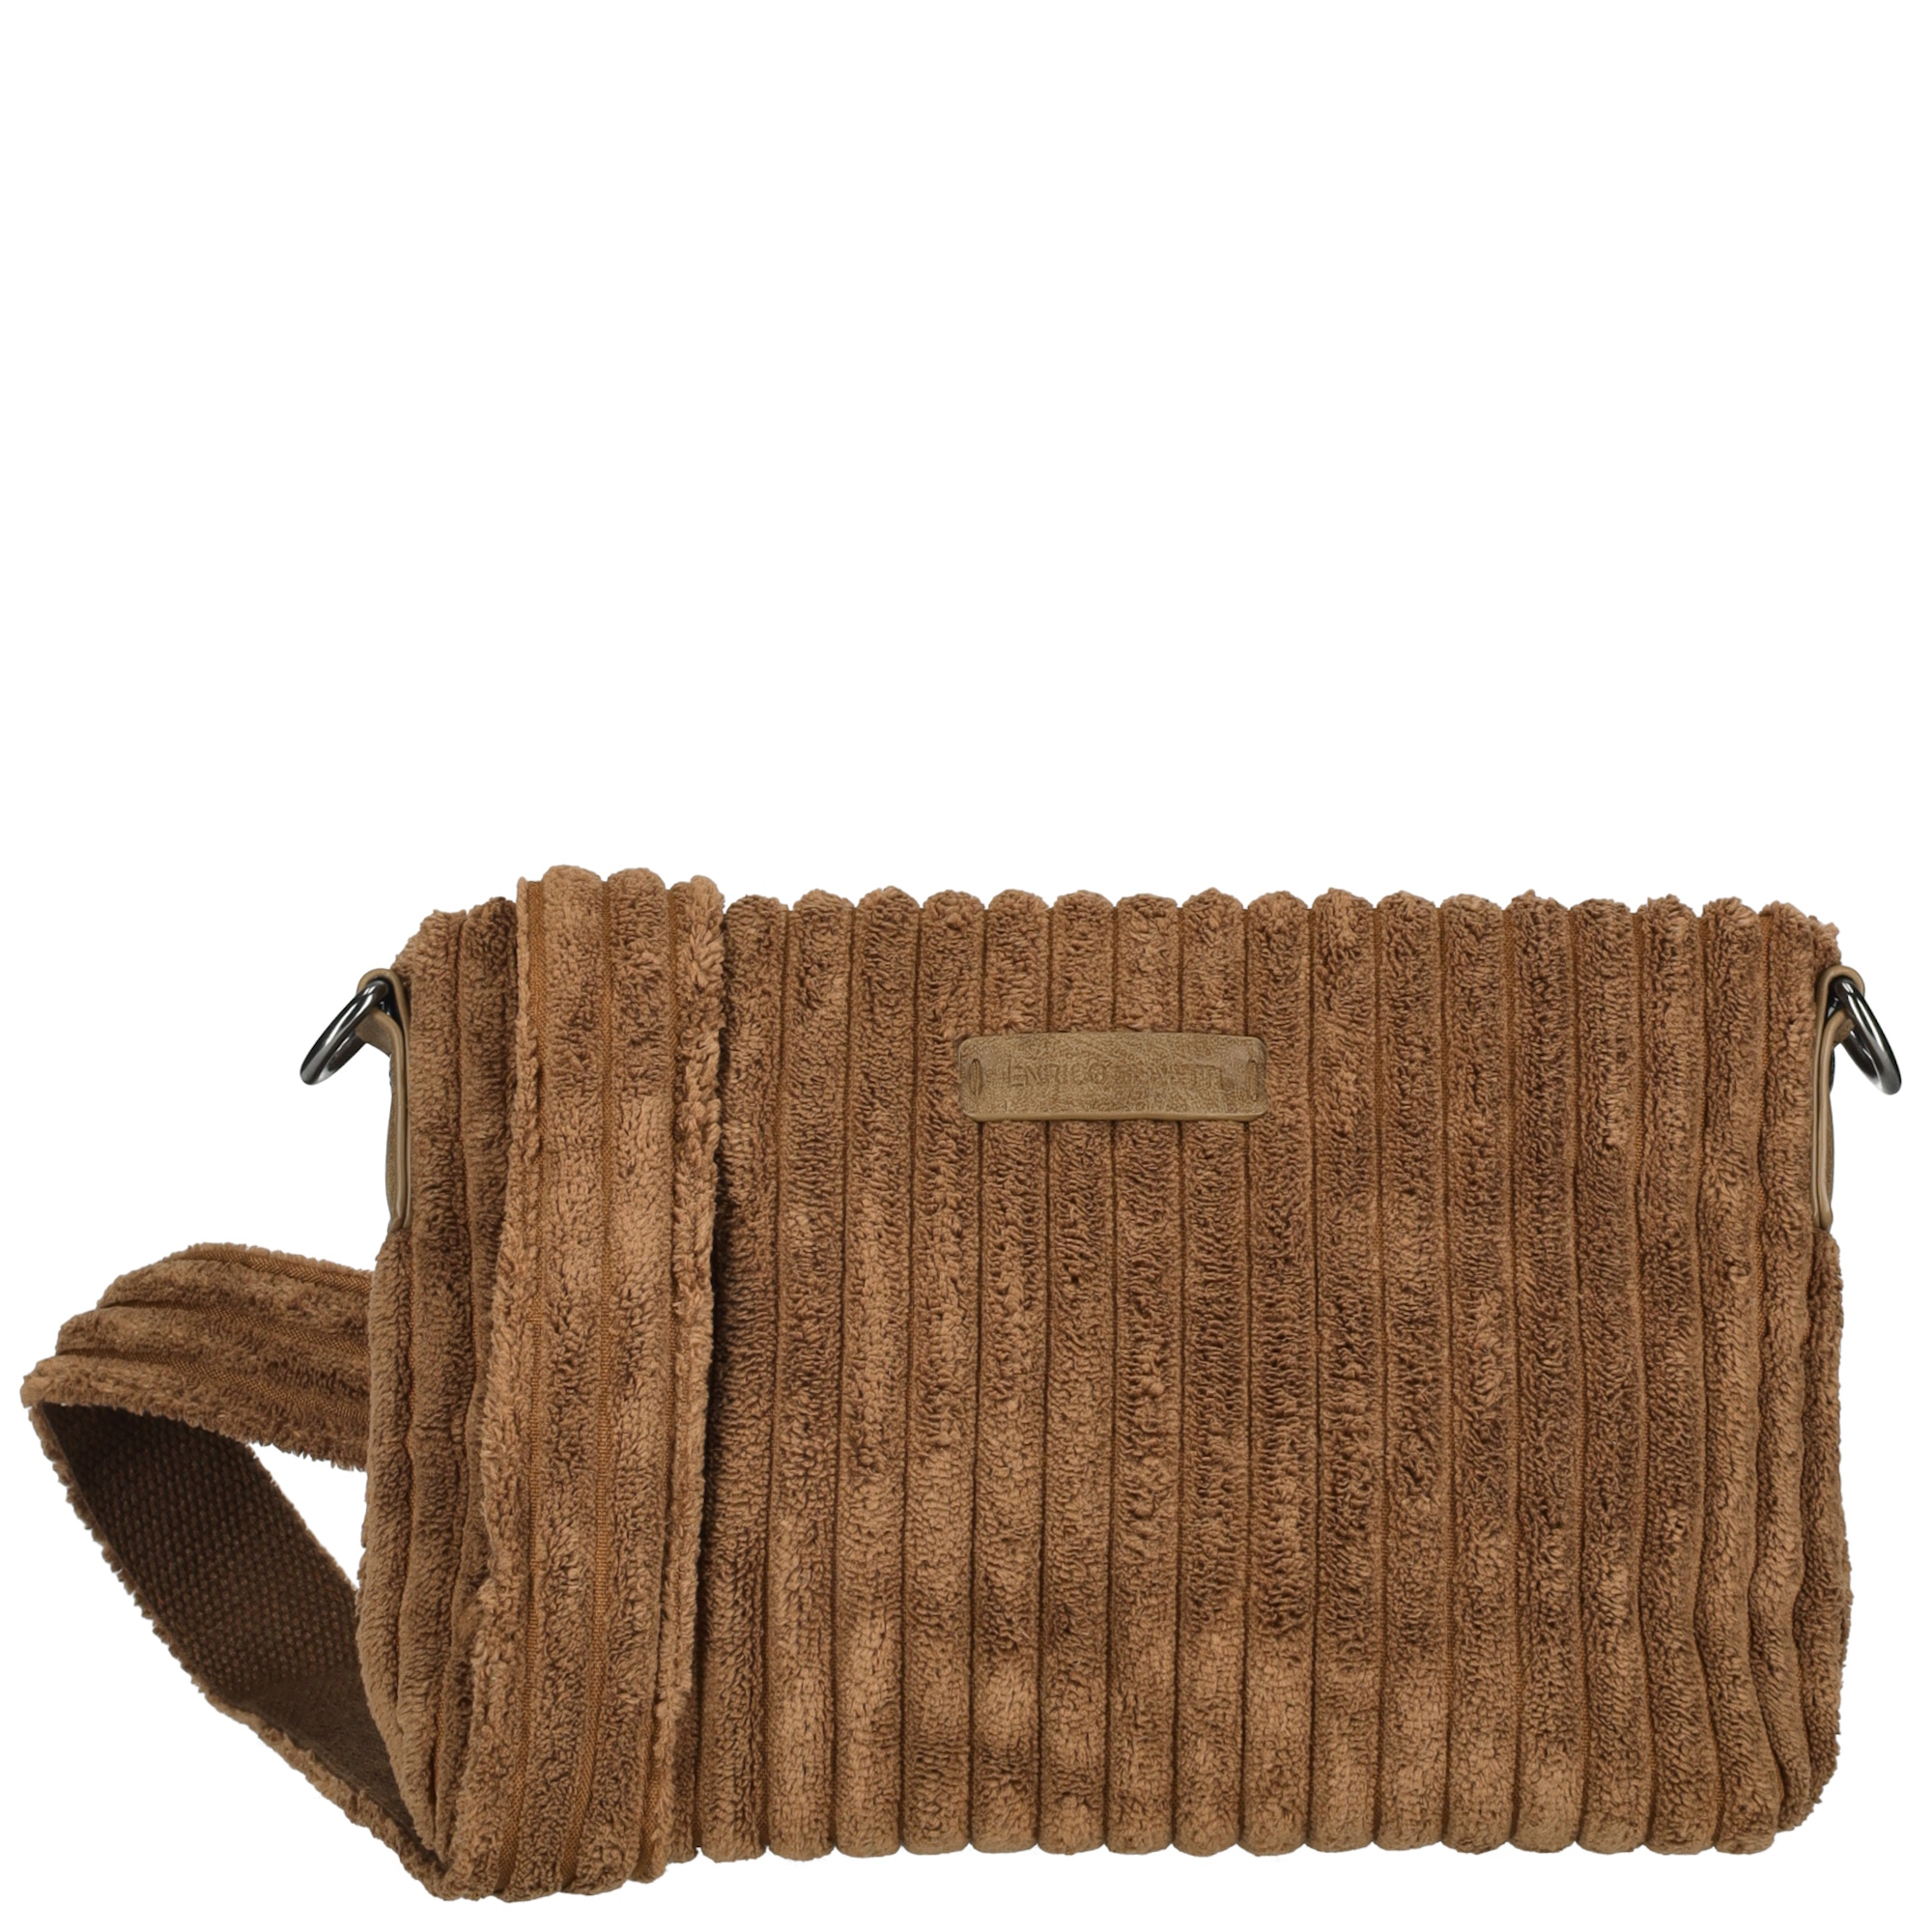 Enrico Benetti Rosie small crossover bag brown